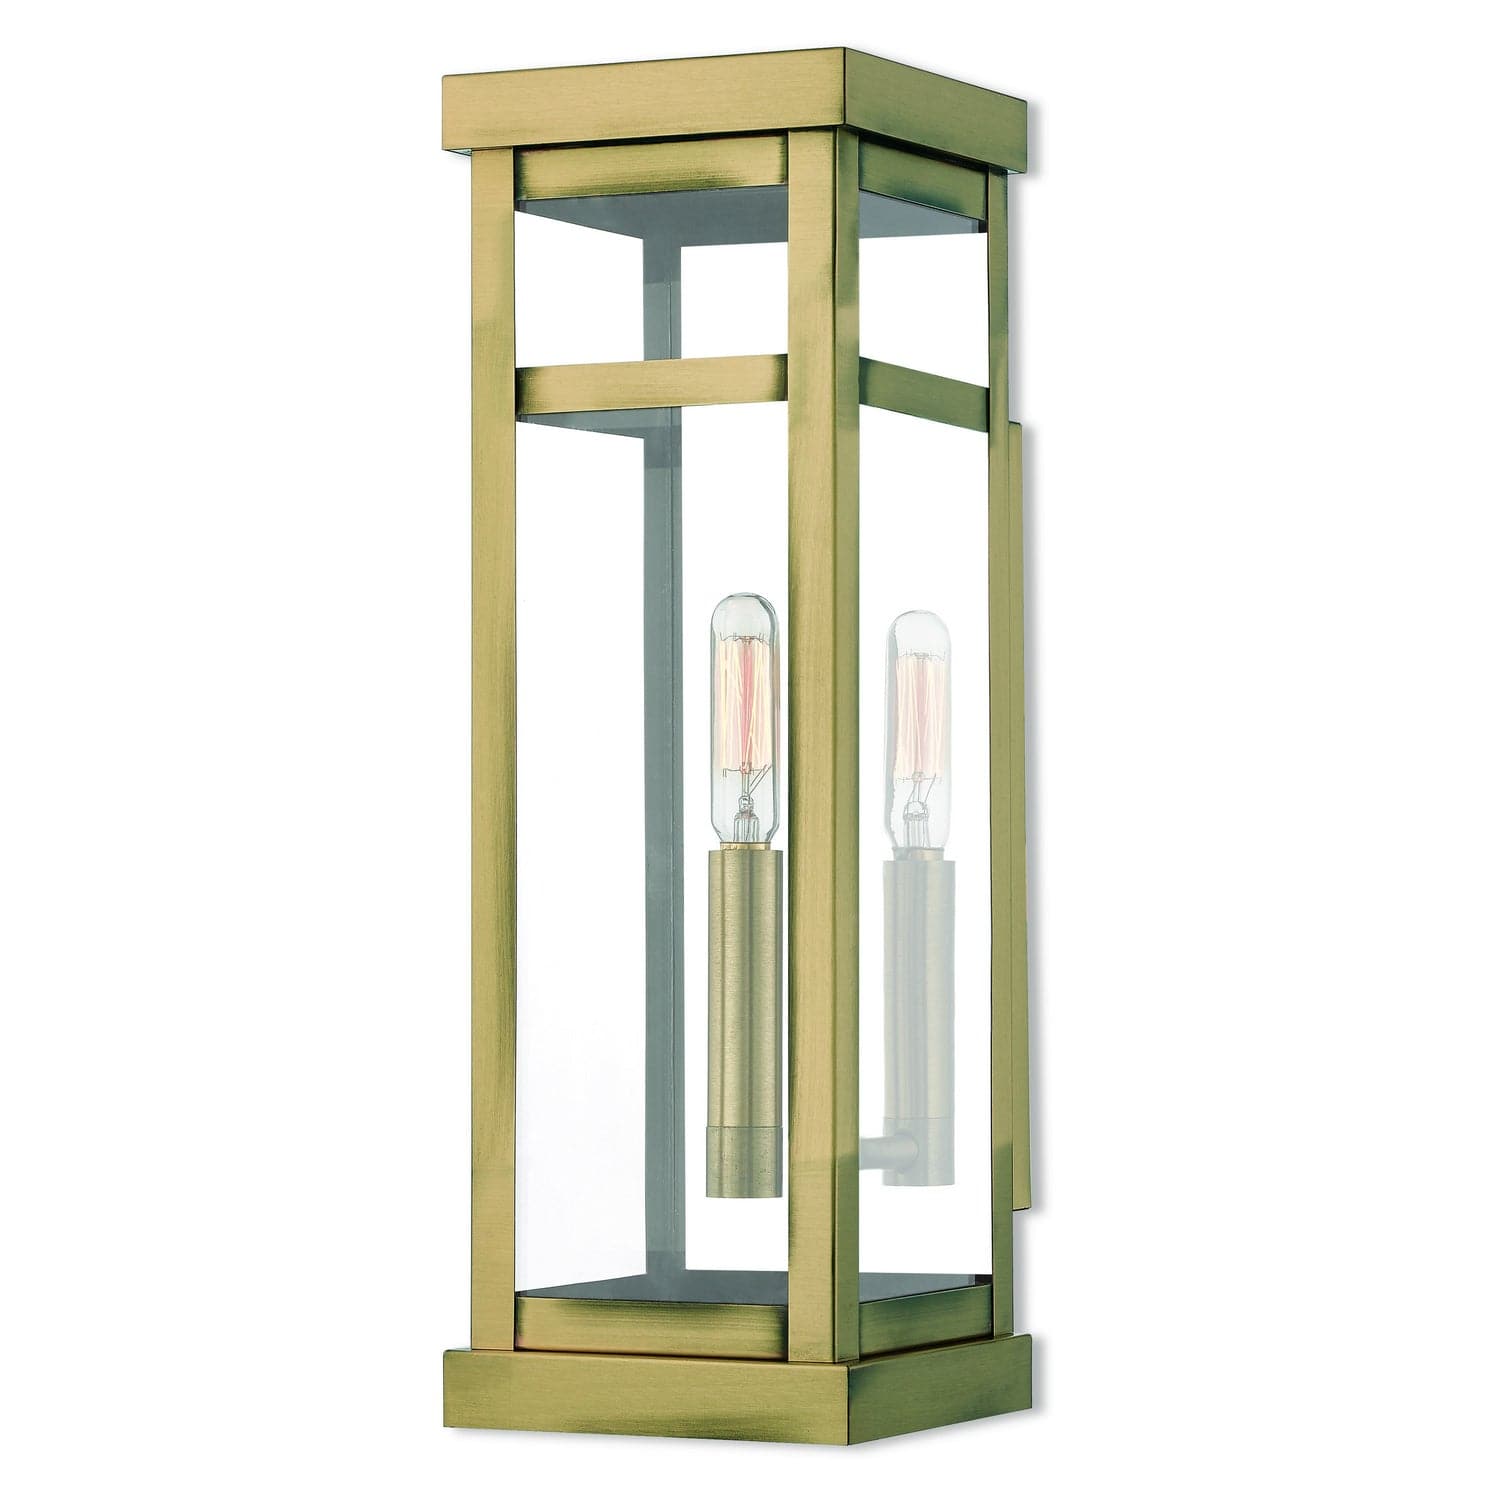 Livex Lighting - 20703-01 - One Light Outdoor Wall Lantern - Hopewell - Antique Brass w/ Polished Chrome Stainless Steel